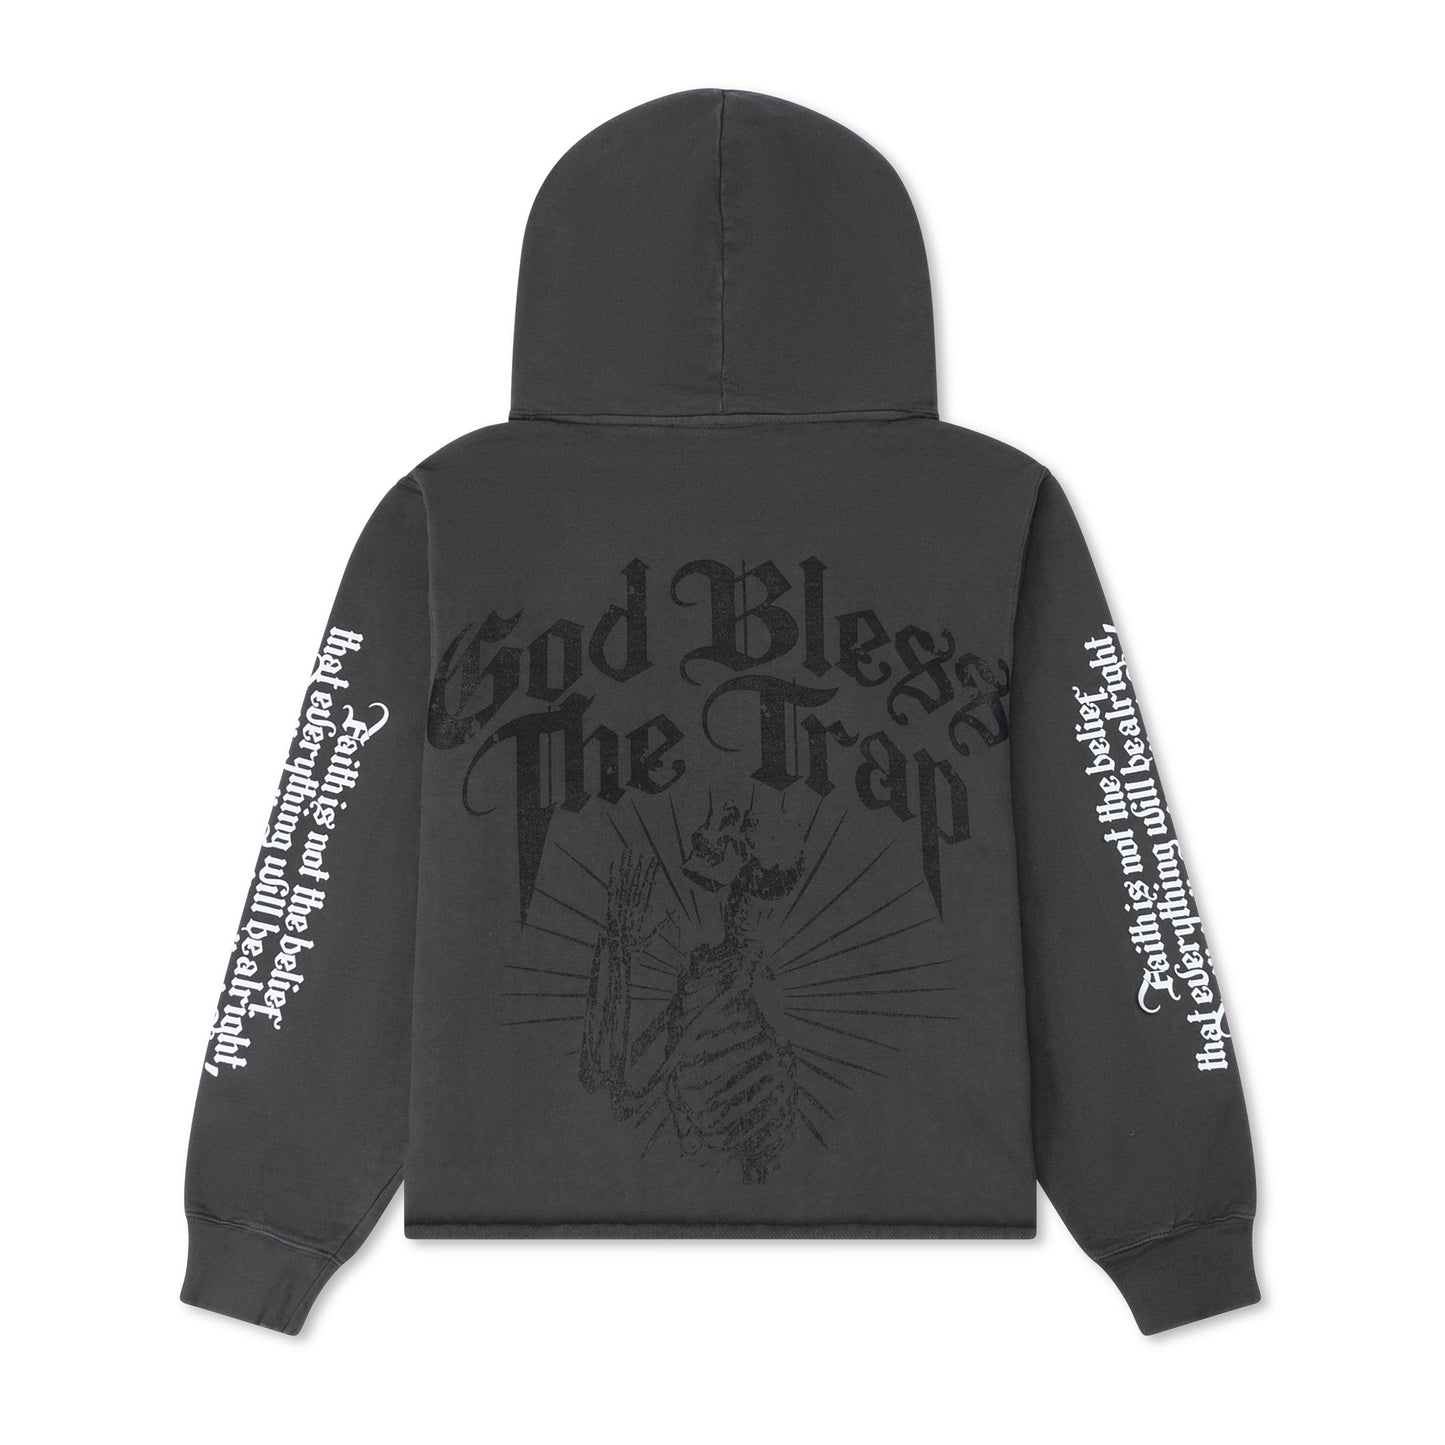 "God Bless The Trap" Hoodie